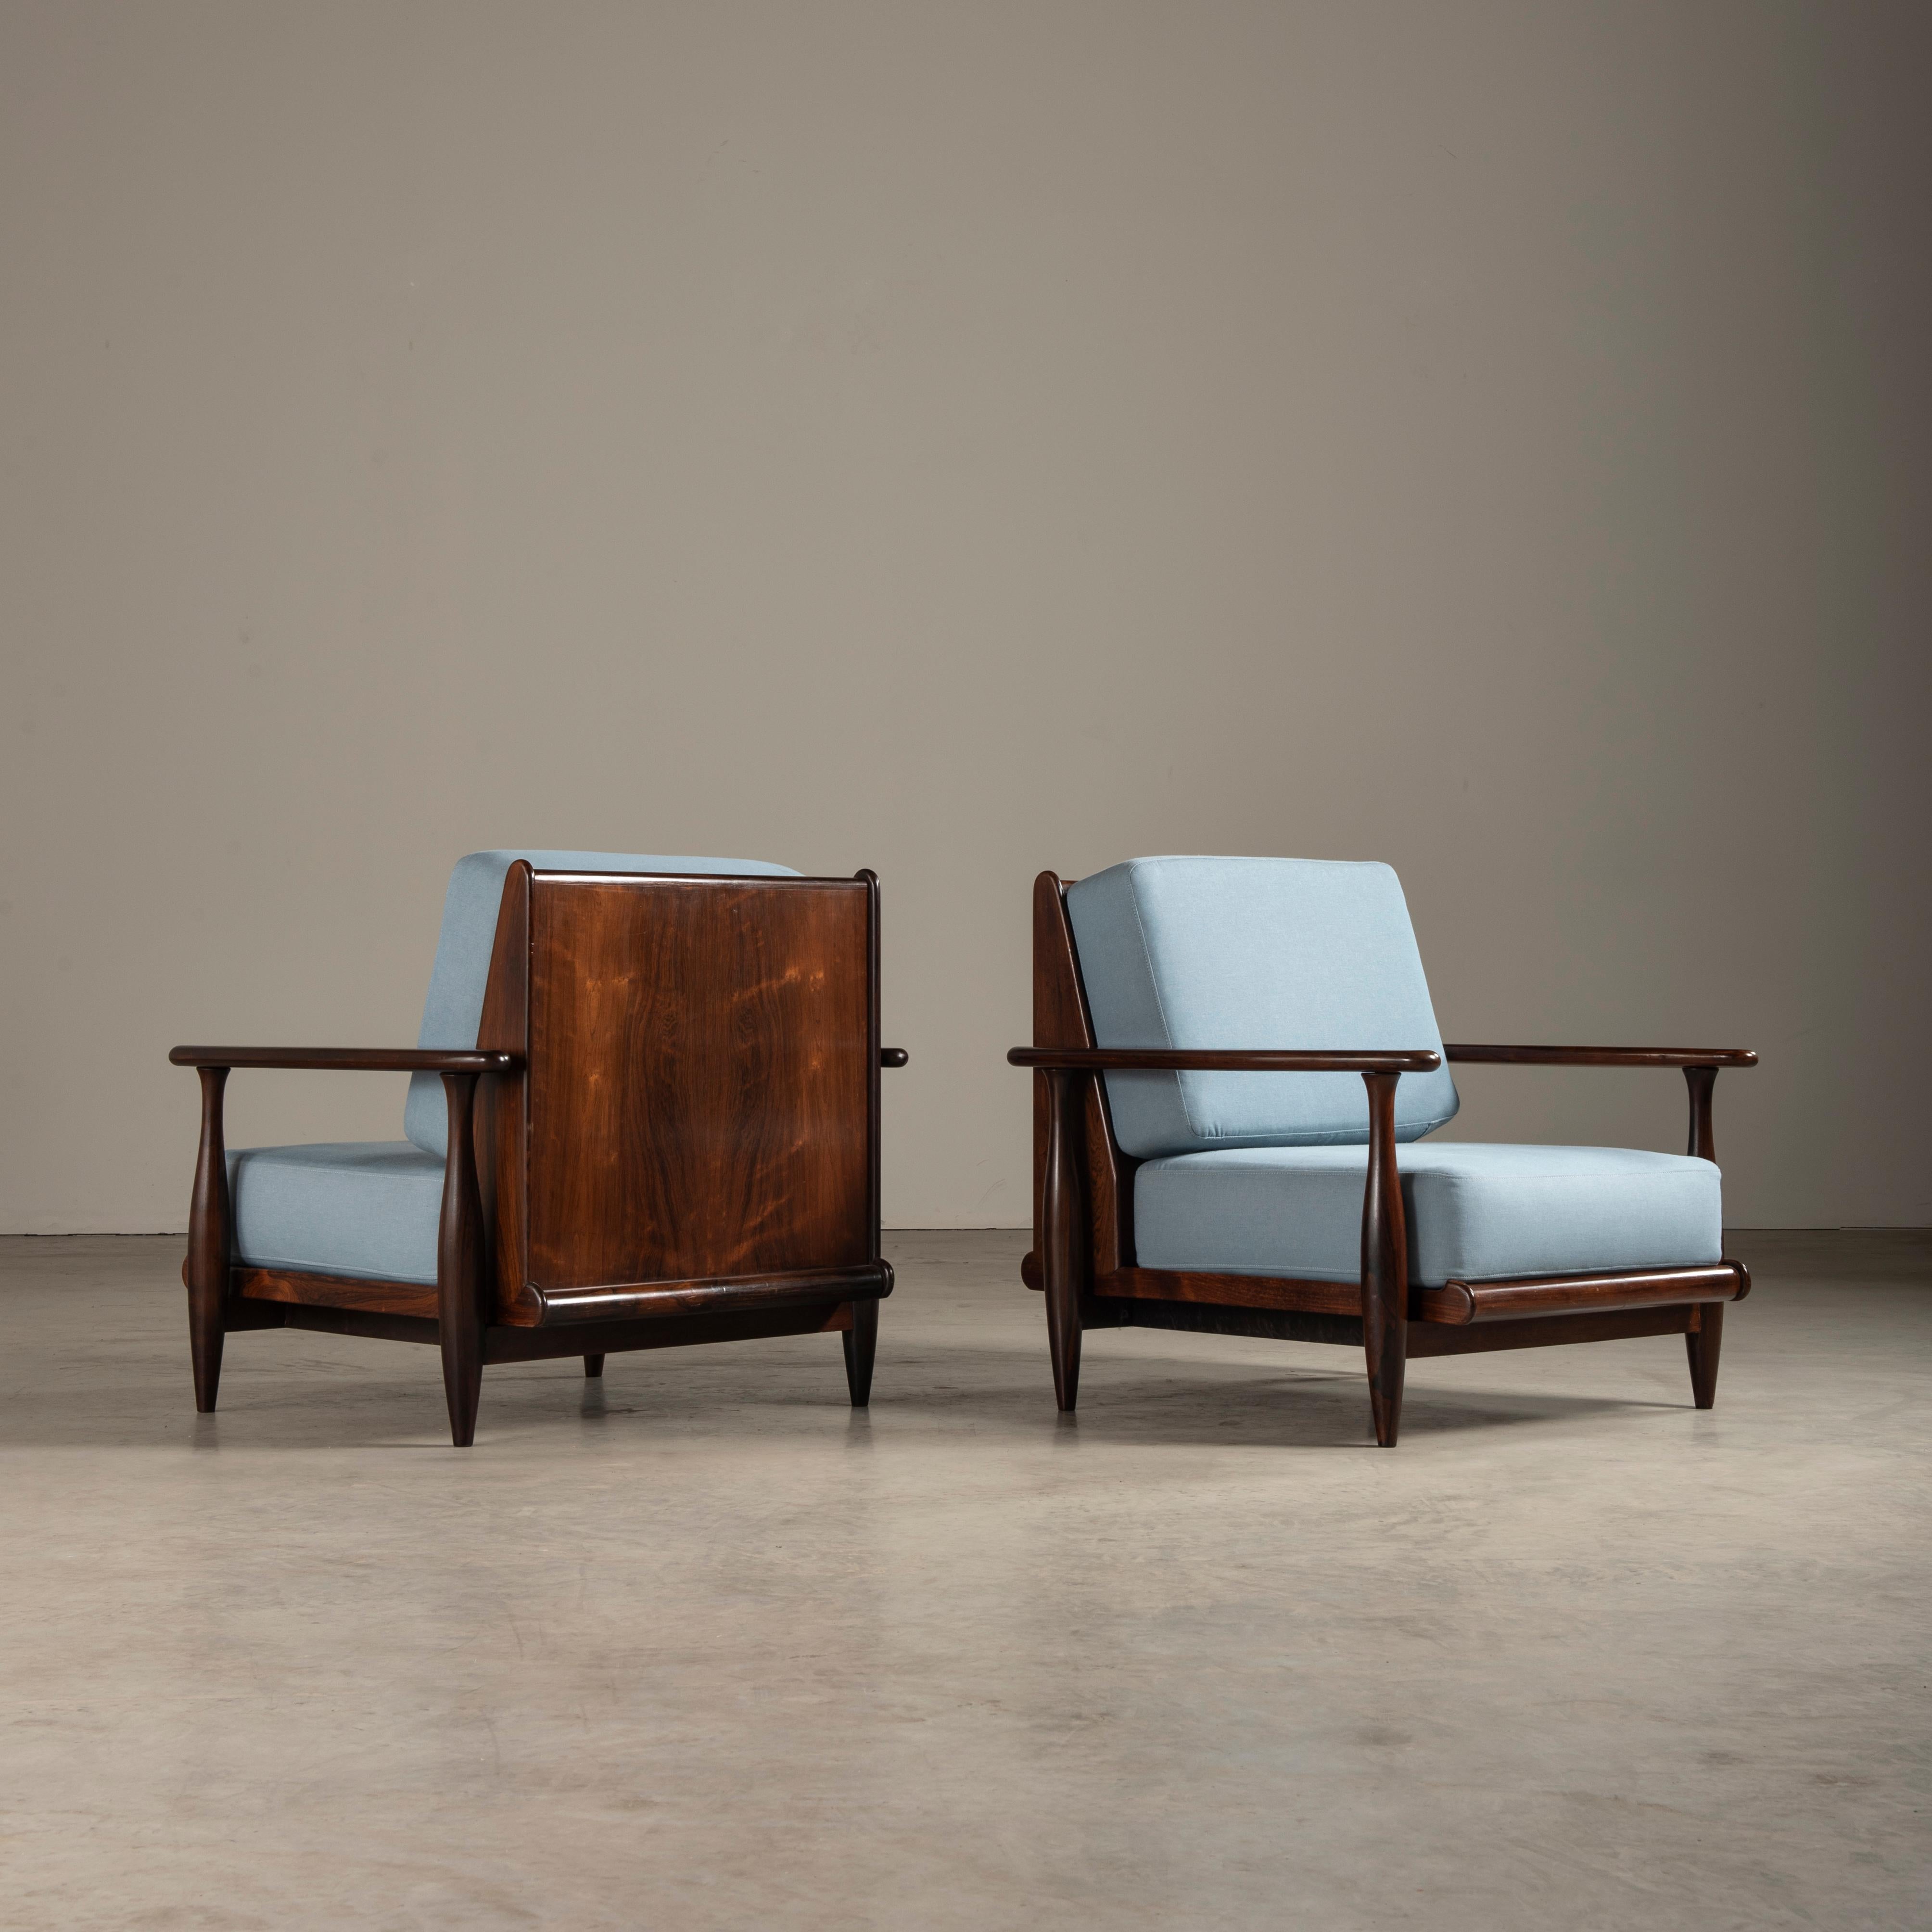 These lounge chairs, masterfully crafted by Liceu de Artes e Ofícios, are an epitome of the Brazilian mid-century design movement, blending timeless elegance with superior craftsmanship.

Liceu de Artes e Ofícios has been a cornerstone in the realm